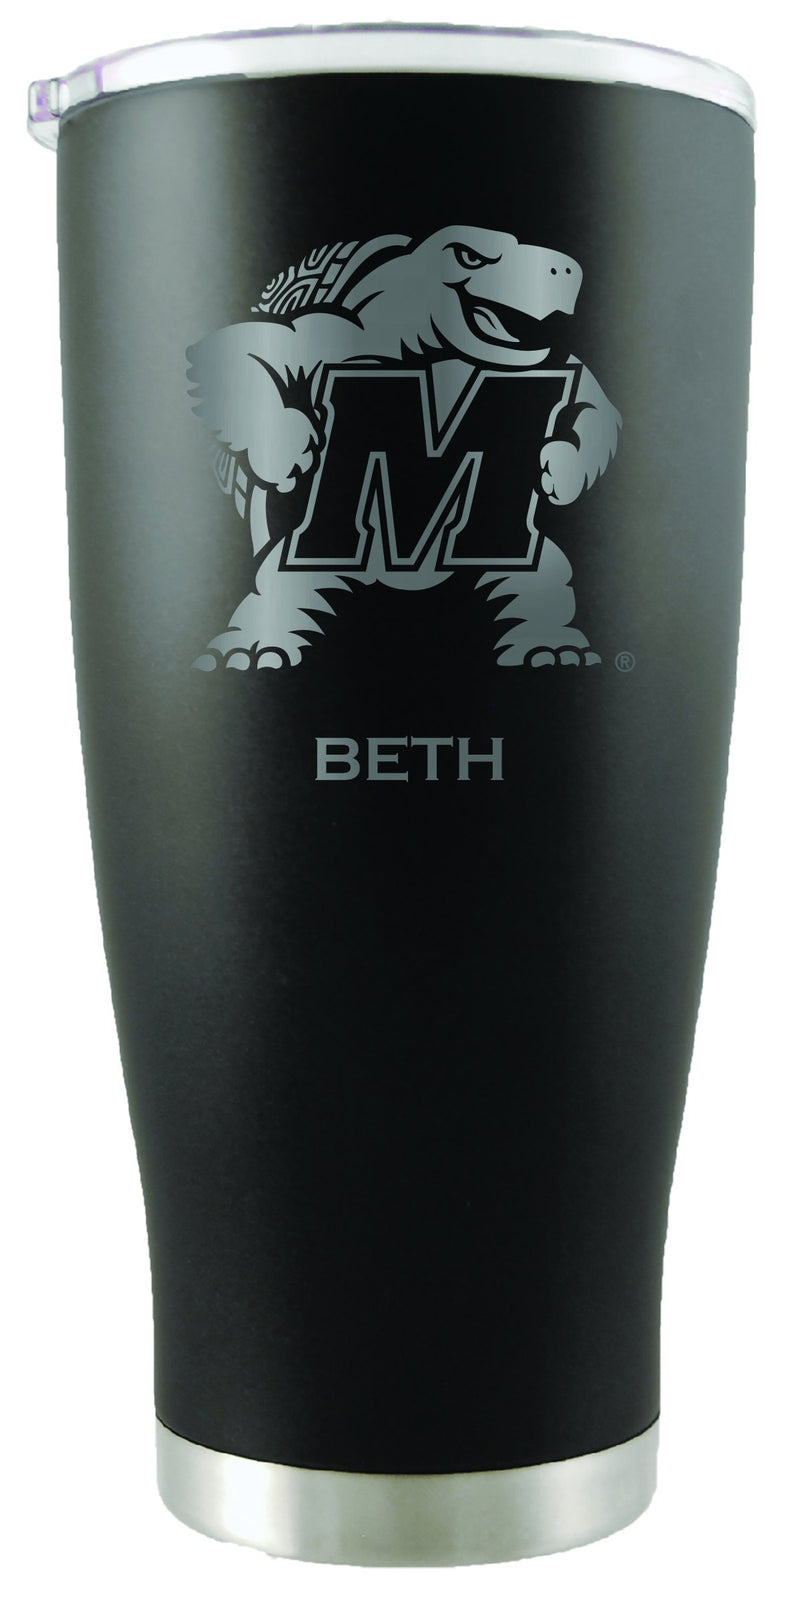 20oz Black Personalized Stainless Steel Tumbler | Maryland Terrapins
COL, CurrentProduct, Drinkware_category_All, MAR, Maryland Terrapins, Personalized_Personalized
The Memory Company